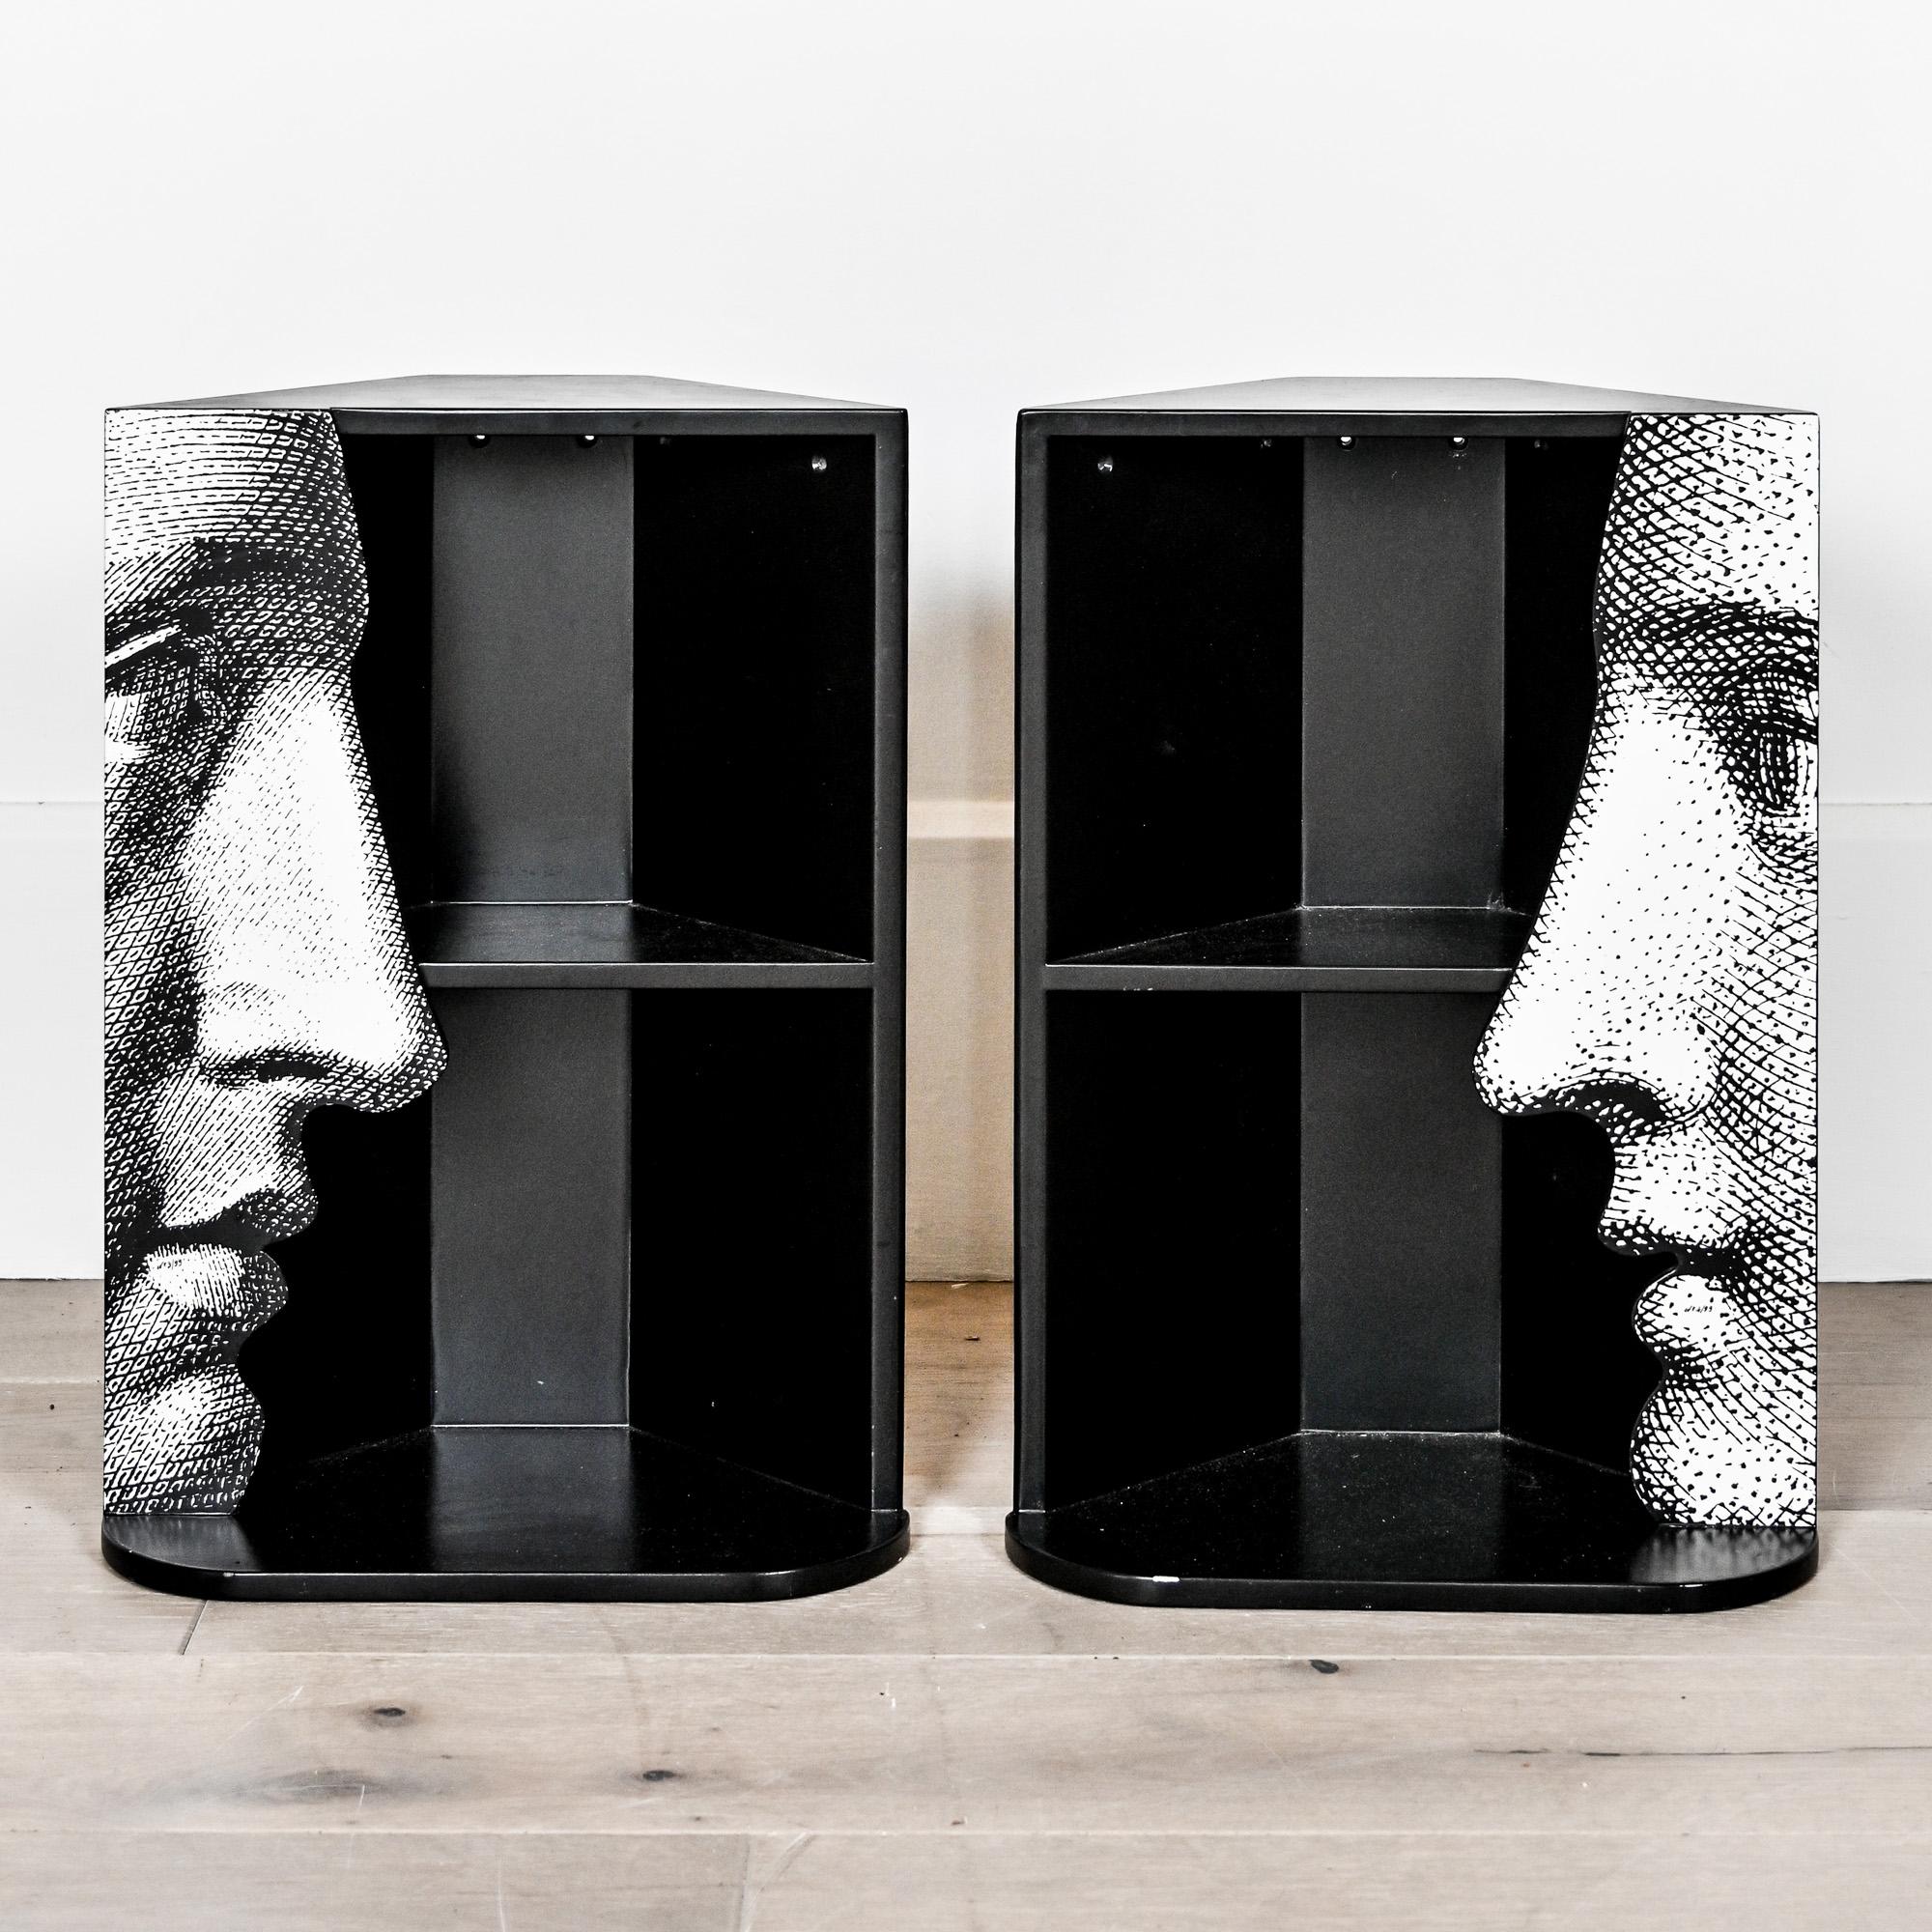 Rare pair of Barnaba Fornasetti wall shelves from the “Profilo” series signed and numbered, 3 & 4 out of 99 Italy circa 2010

Possibly originally conceived for a retail installation
(priced for the pair)

Born in Milan in 1950, Barnaba Fornasetti is